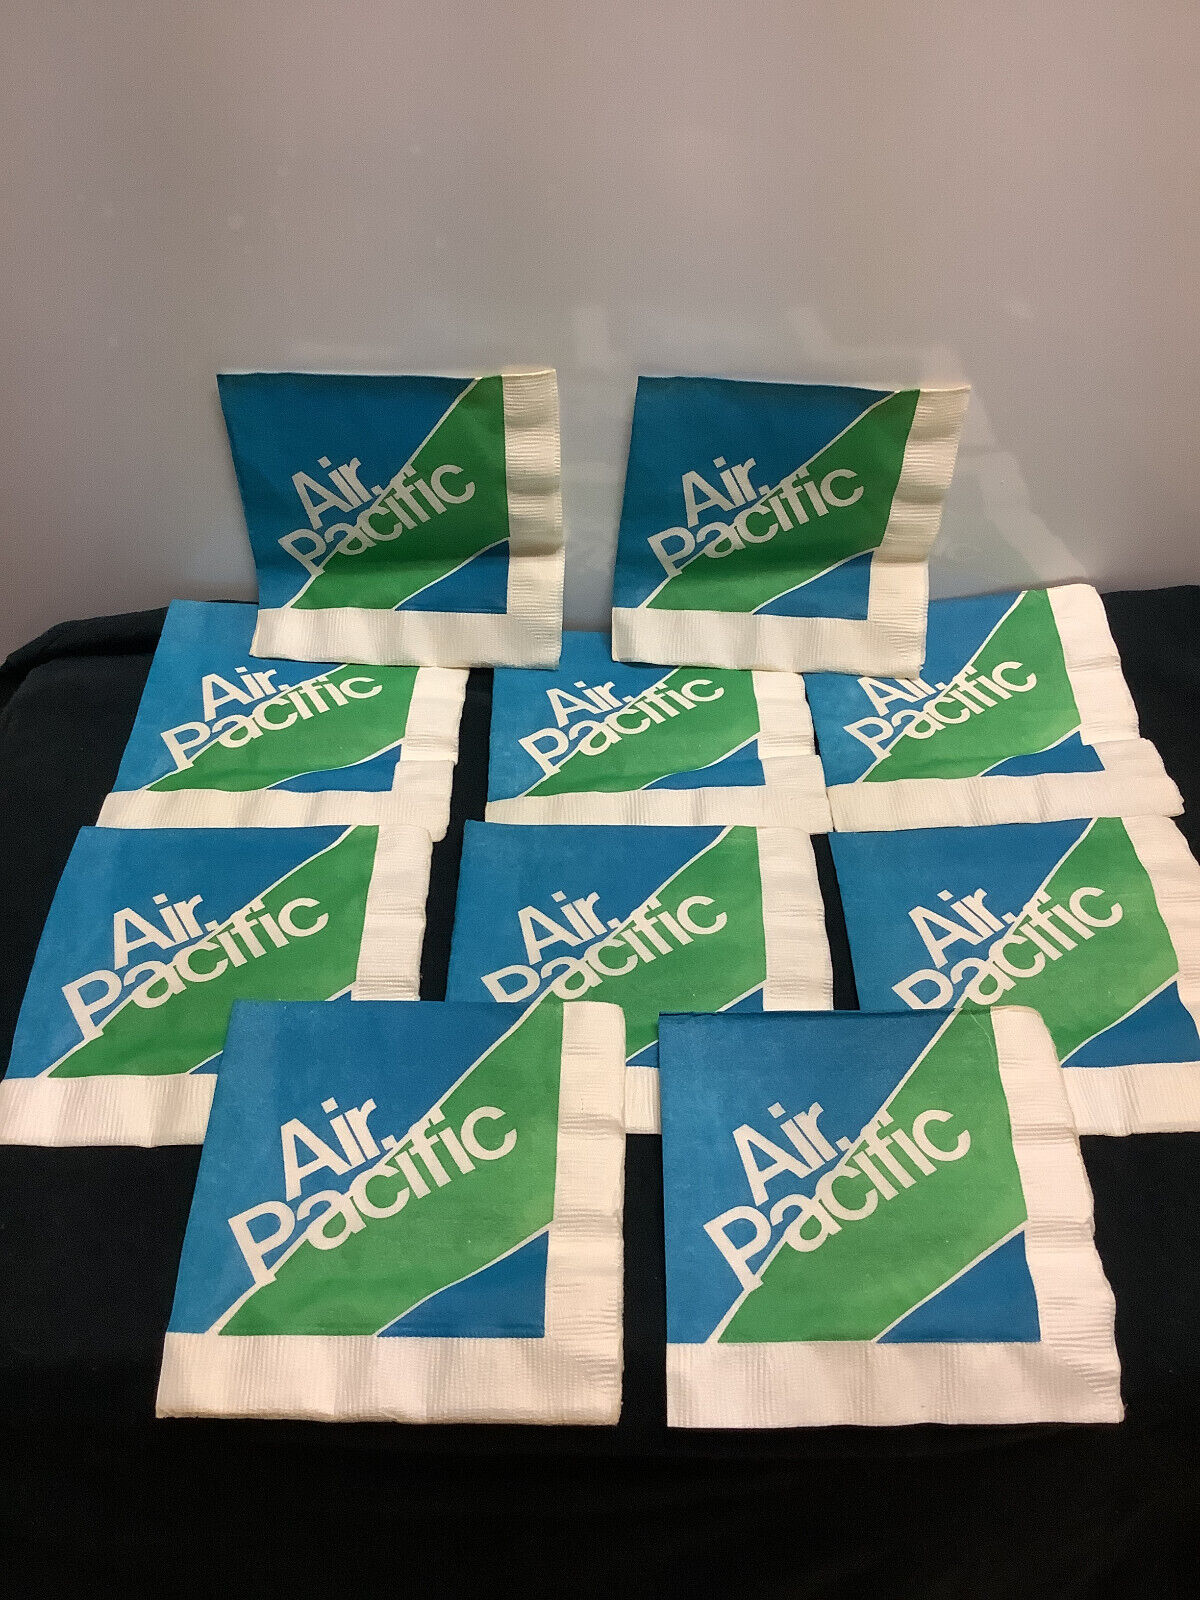 Vintage Air Pacific Airlines of California Inflight beverage napkins 20 ct.